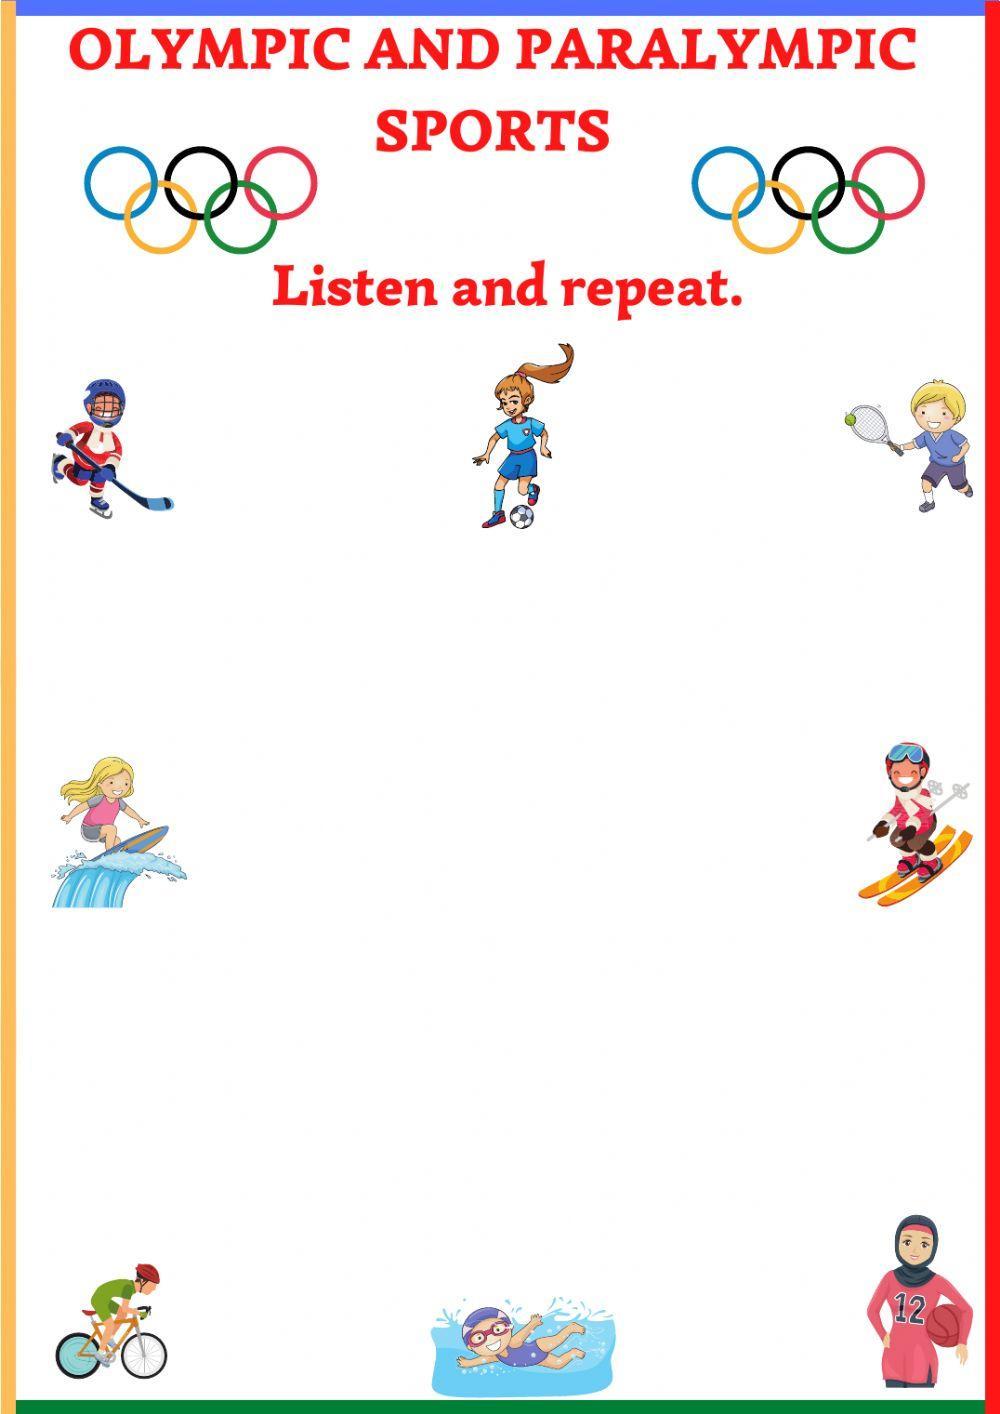 Olympic sports